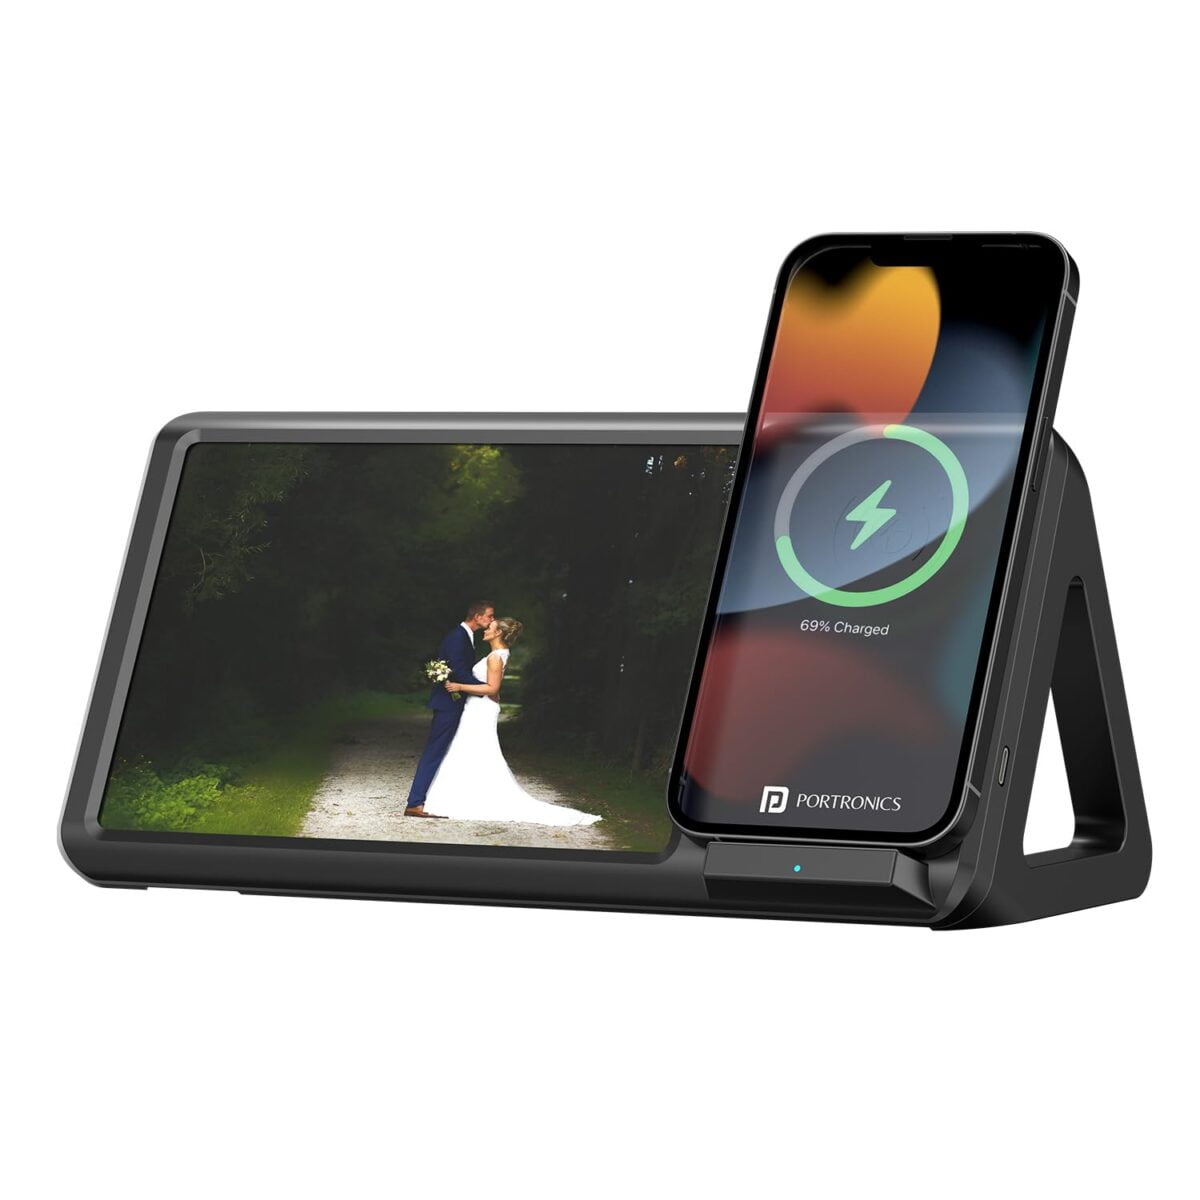 Portronics freedom 5 qi enable charger with photo frame